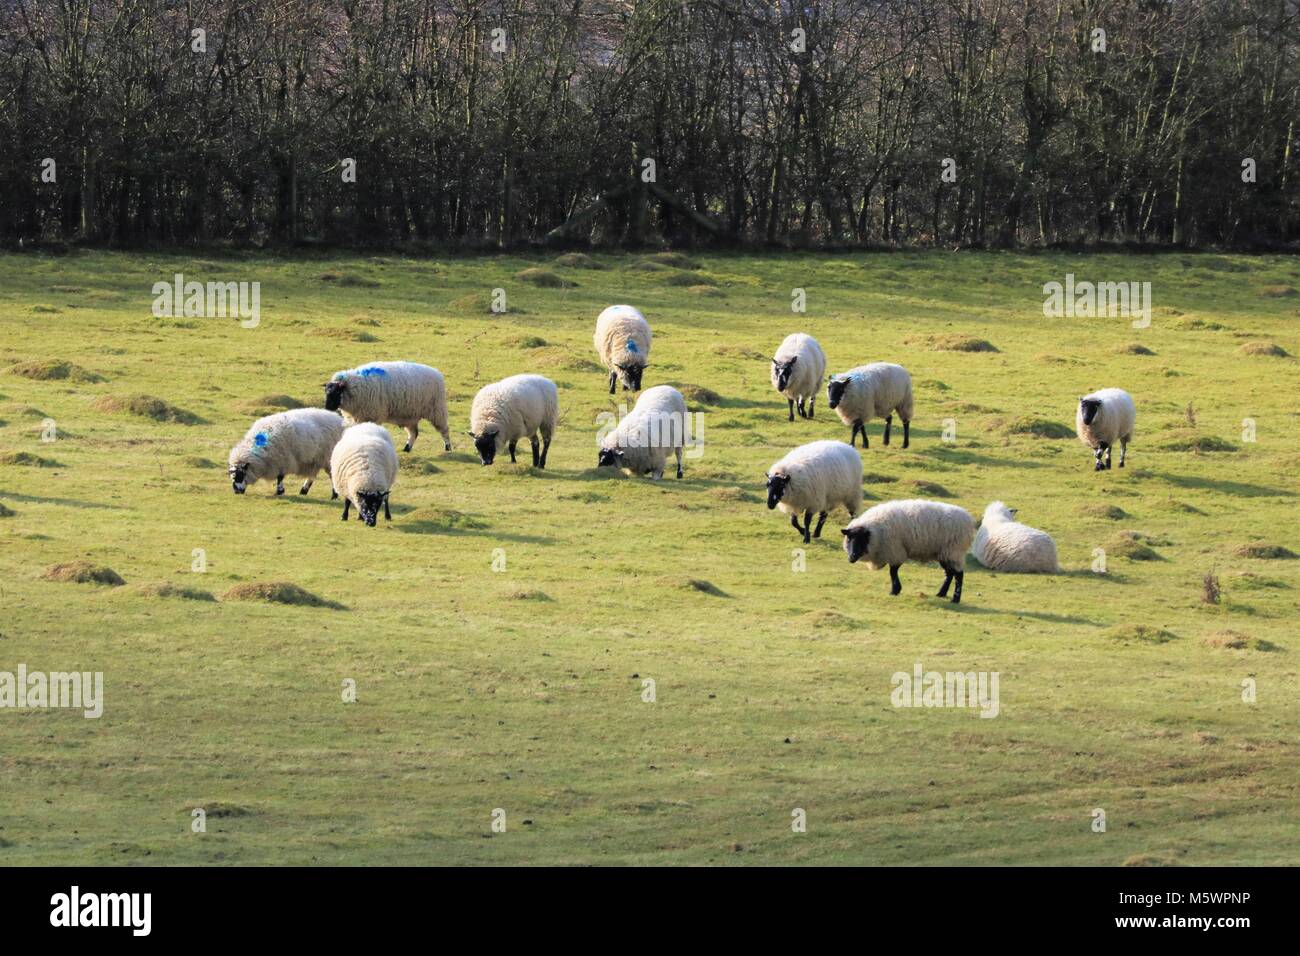 Sheep grazing in a field in the UK Stock Photo